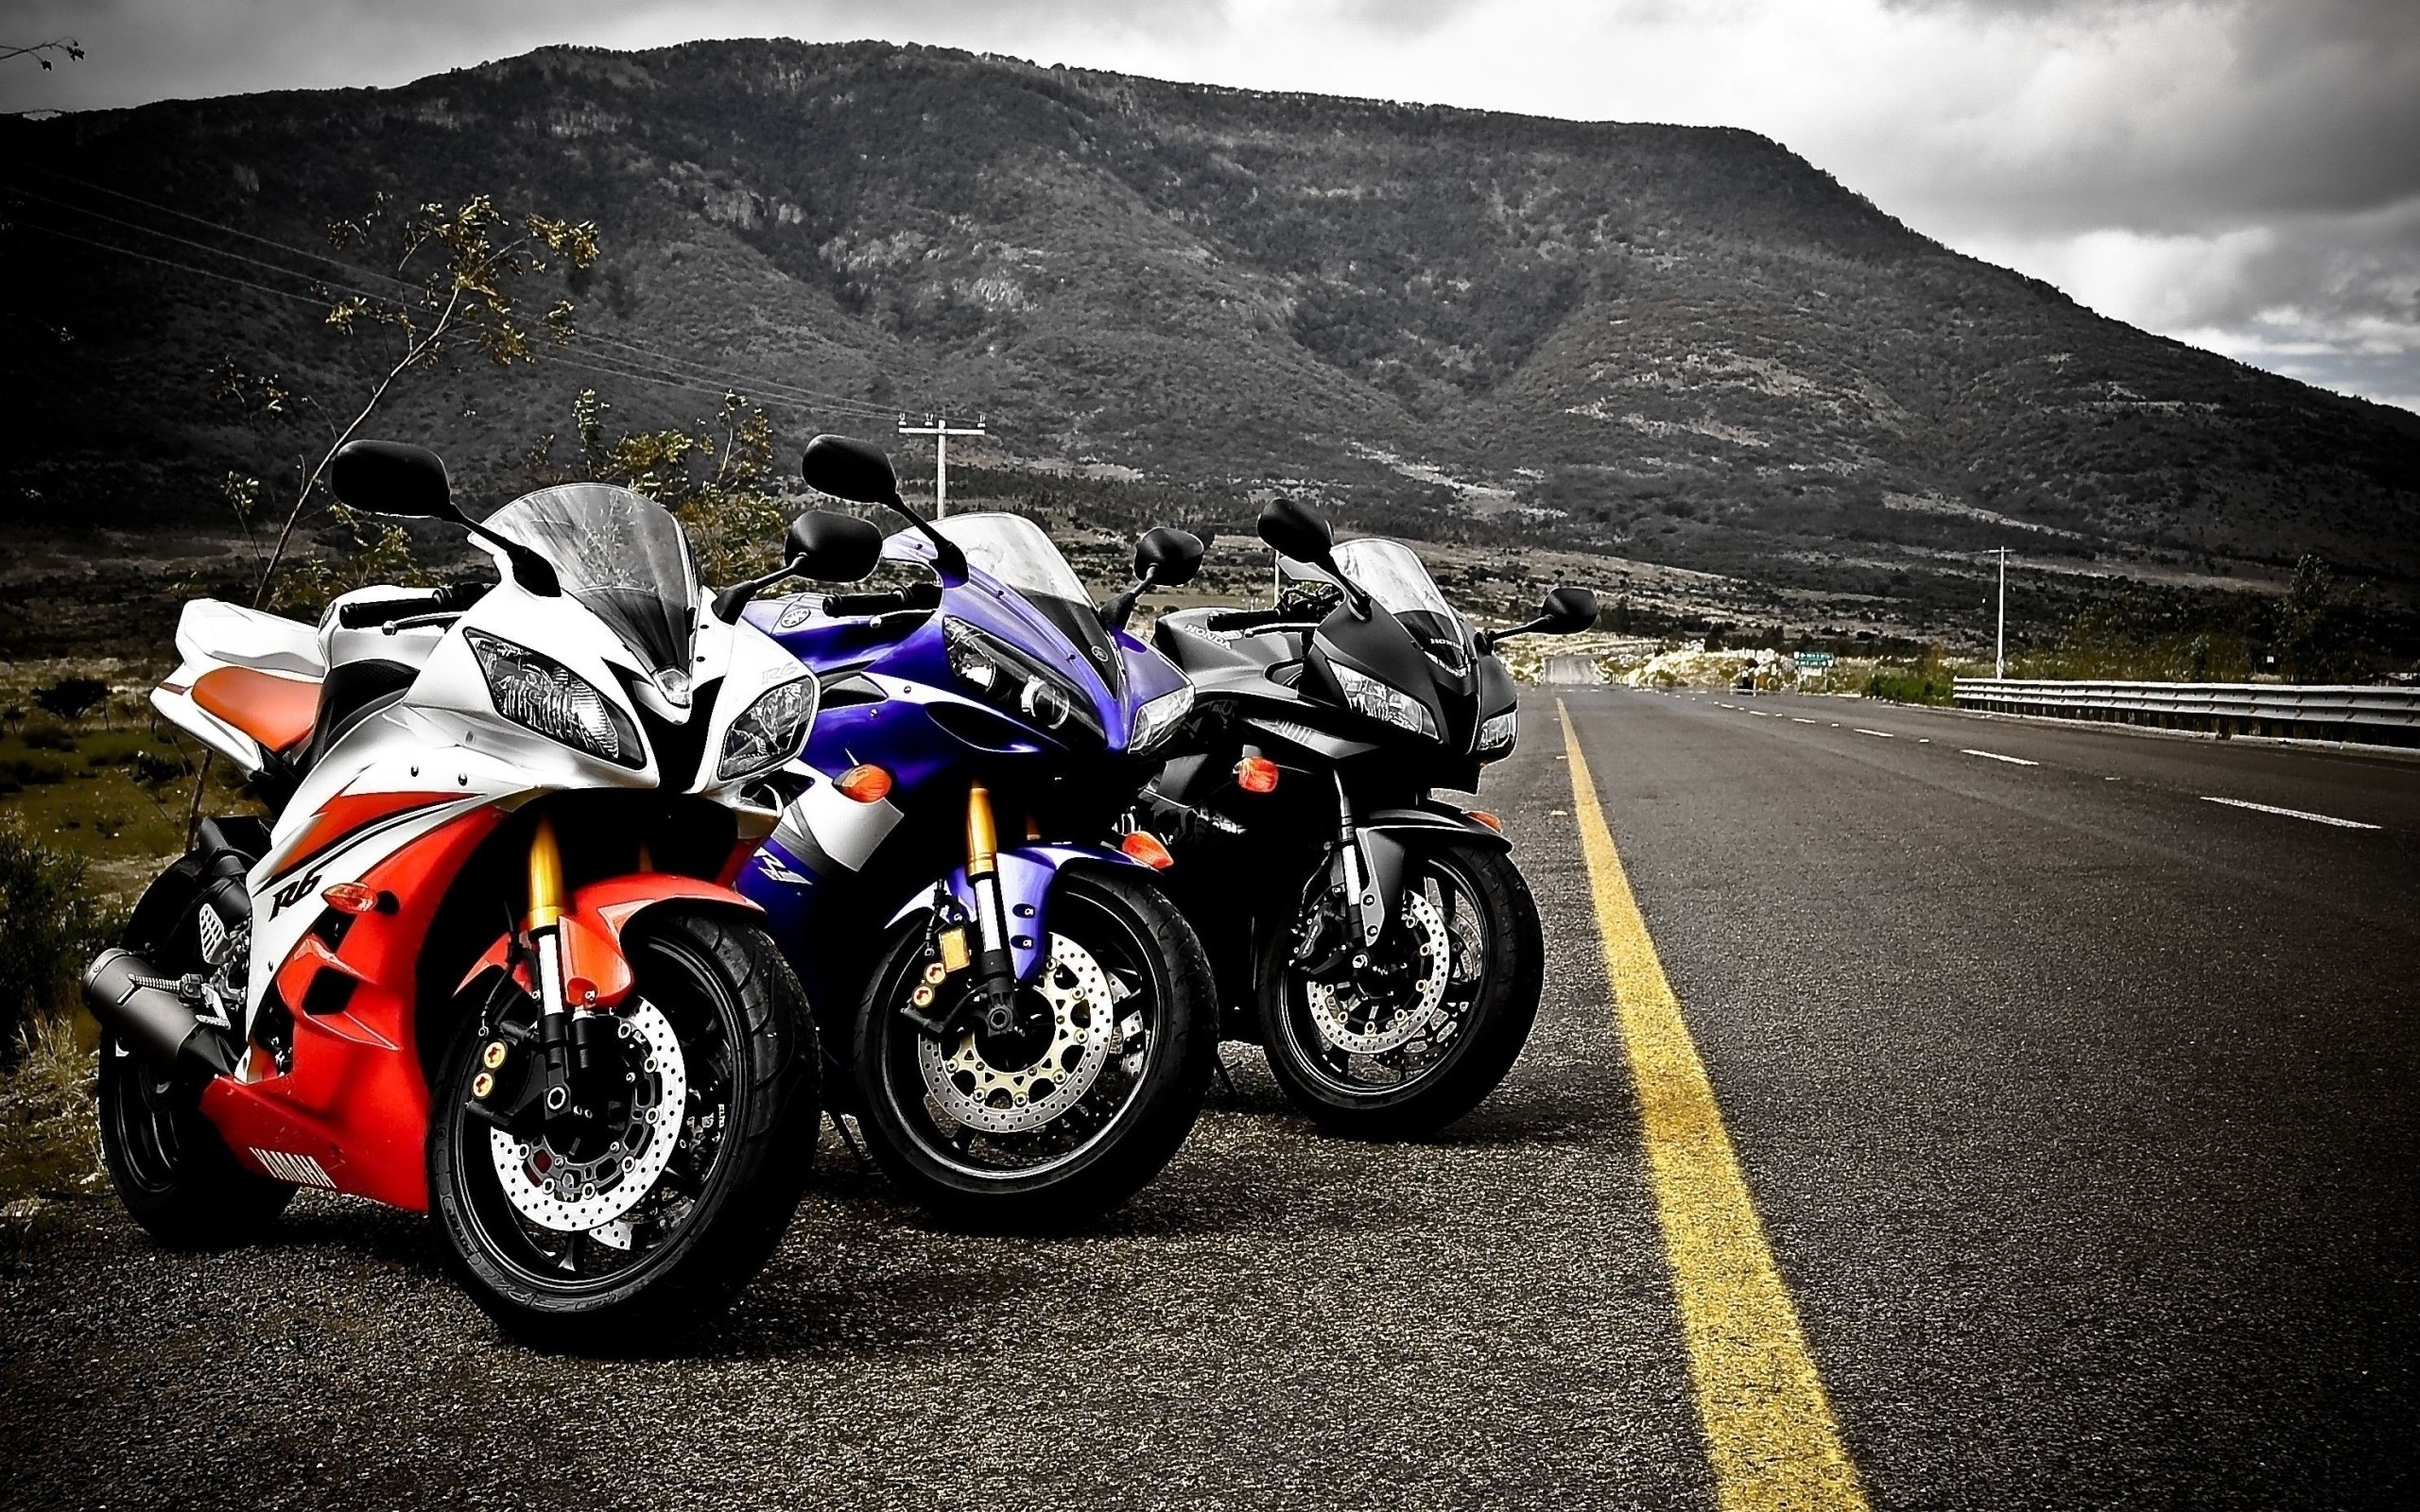 2560x1600 Bikes HD Wallpapers - Free download latest Bikes HD Wallpapers for Computer,  Mobile, iPhone